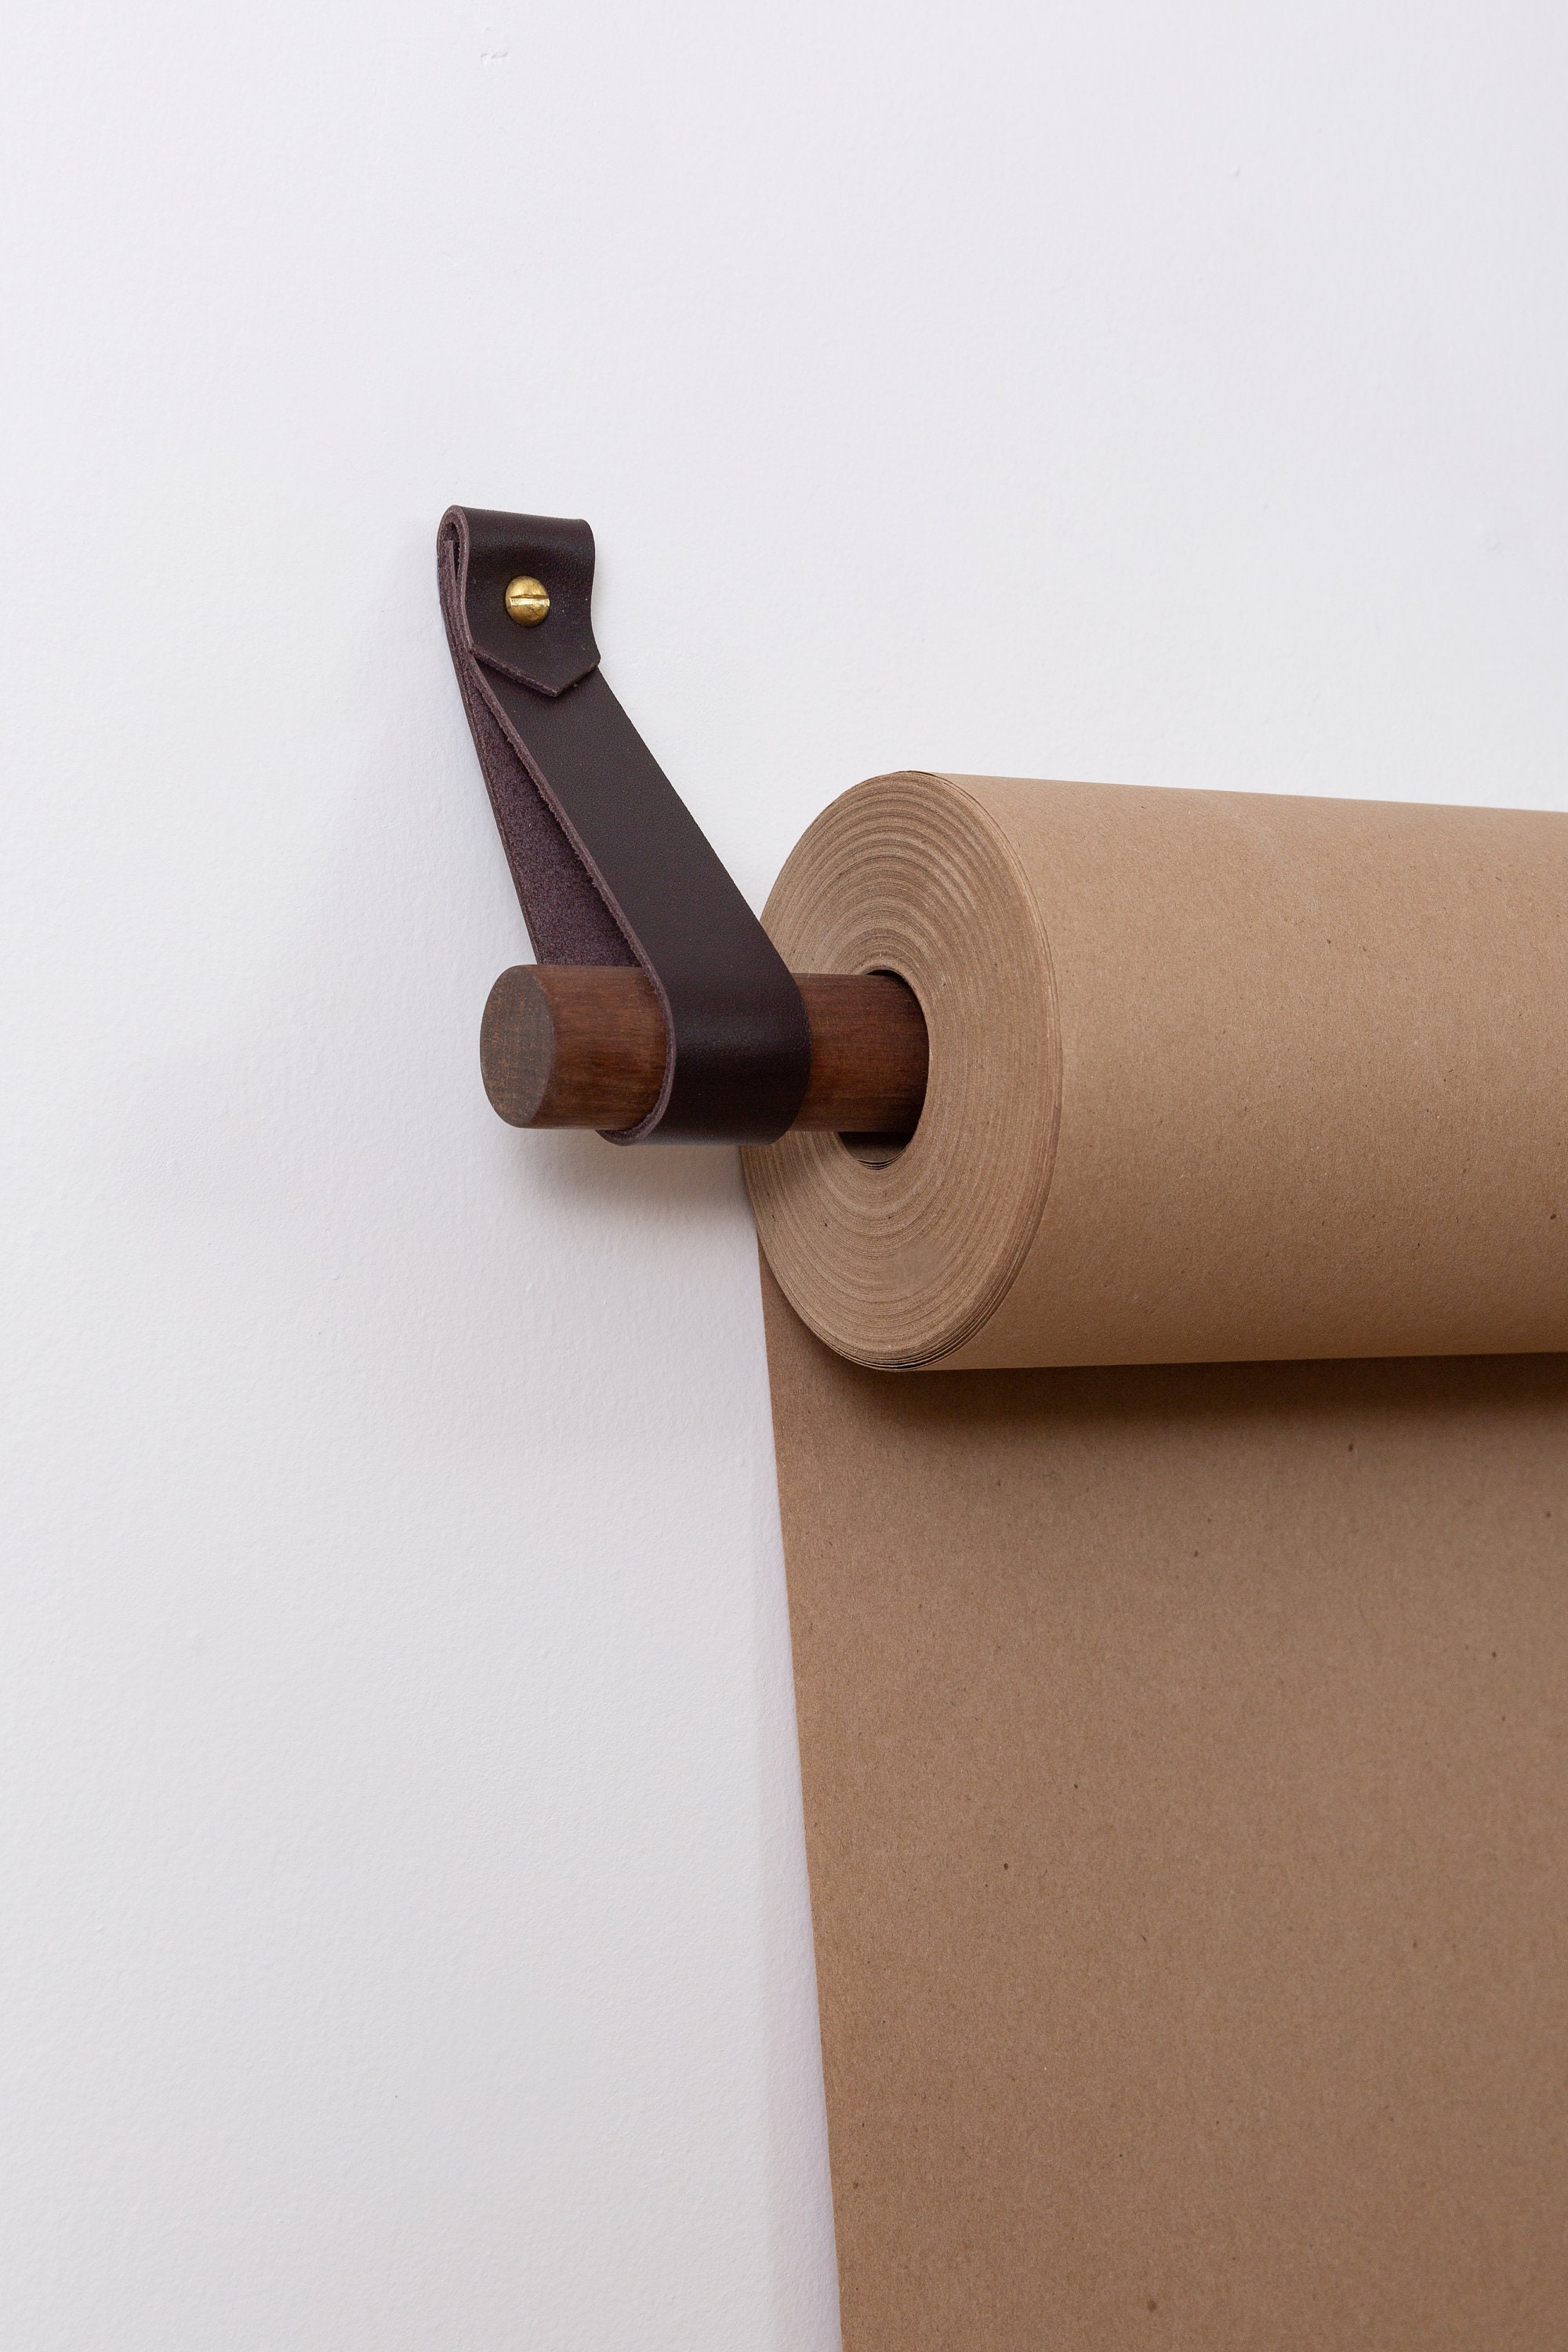 SRNSAEB Wall Mount Kraft Paper Roll Dispenser, Home/Office Note Paper Roll  Holder for Grocery Lists, Important Notes, Phone Numbers, Restaurant Menu